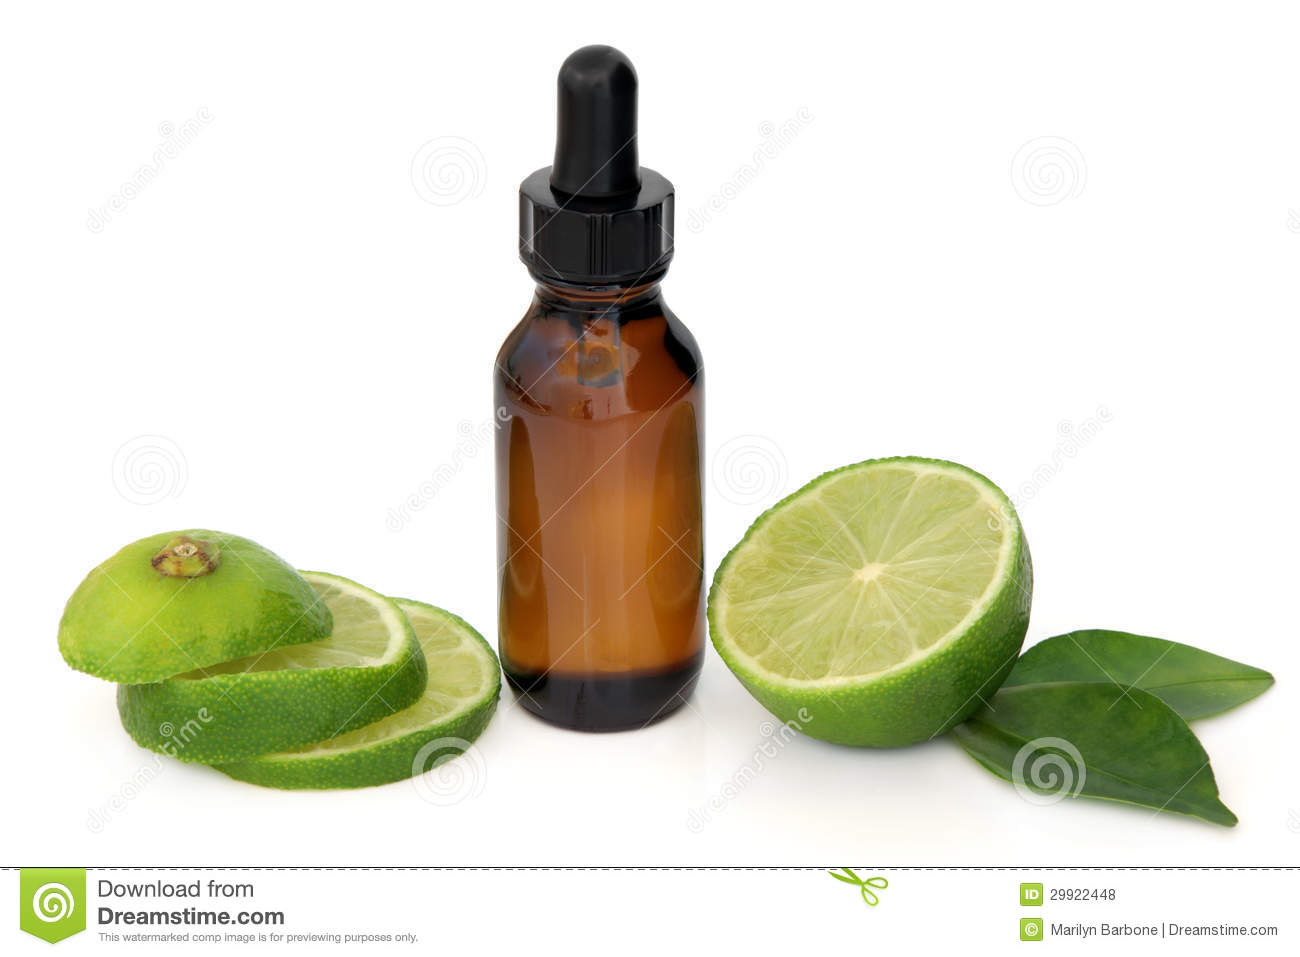 Aromatherapy Essential Oil Bottle With Lime Fruit And Leaf Sprig 